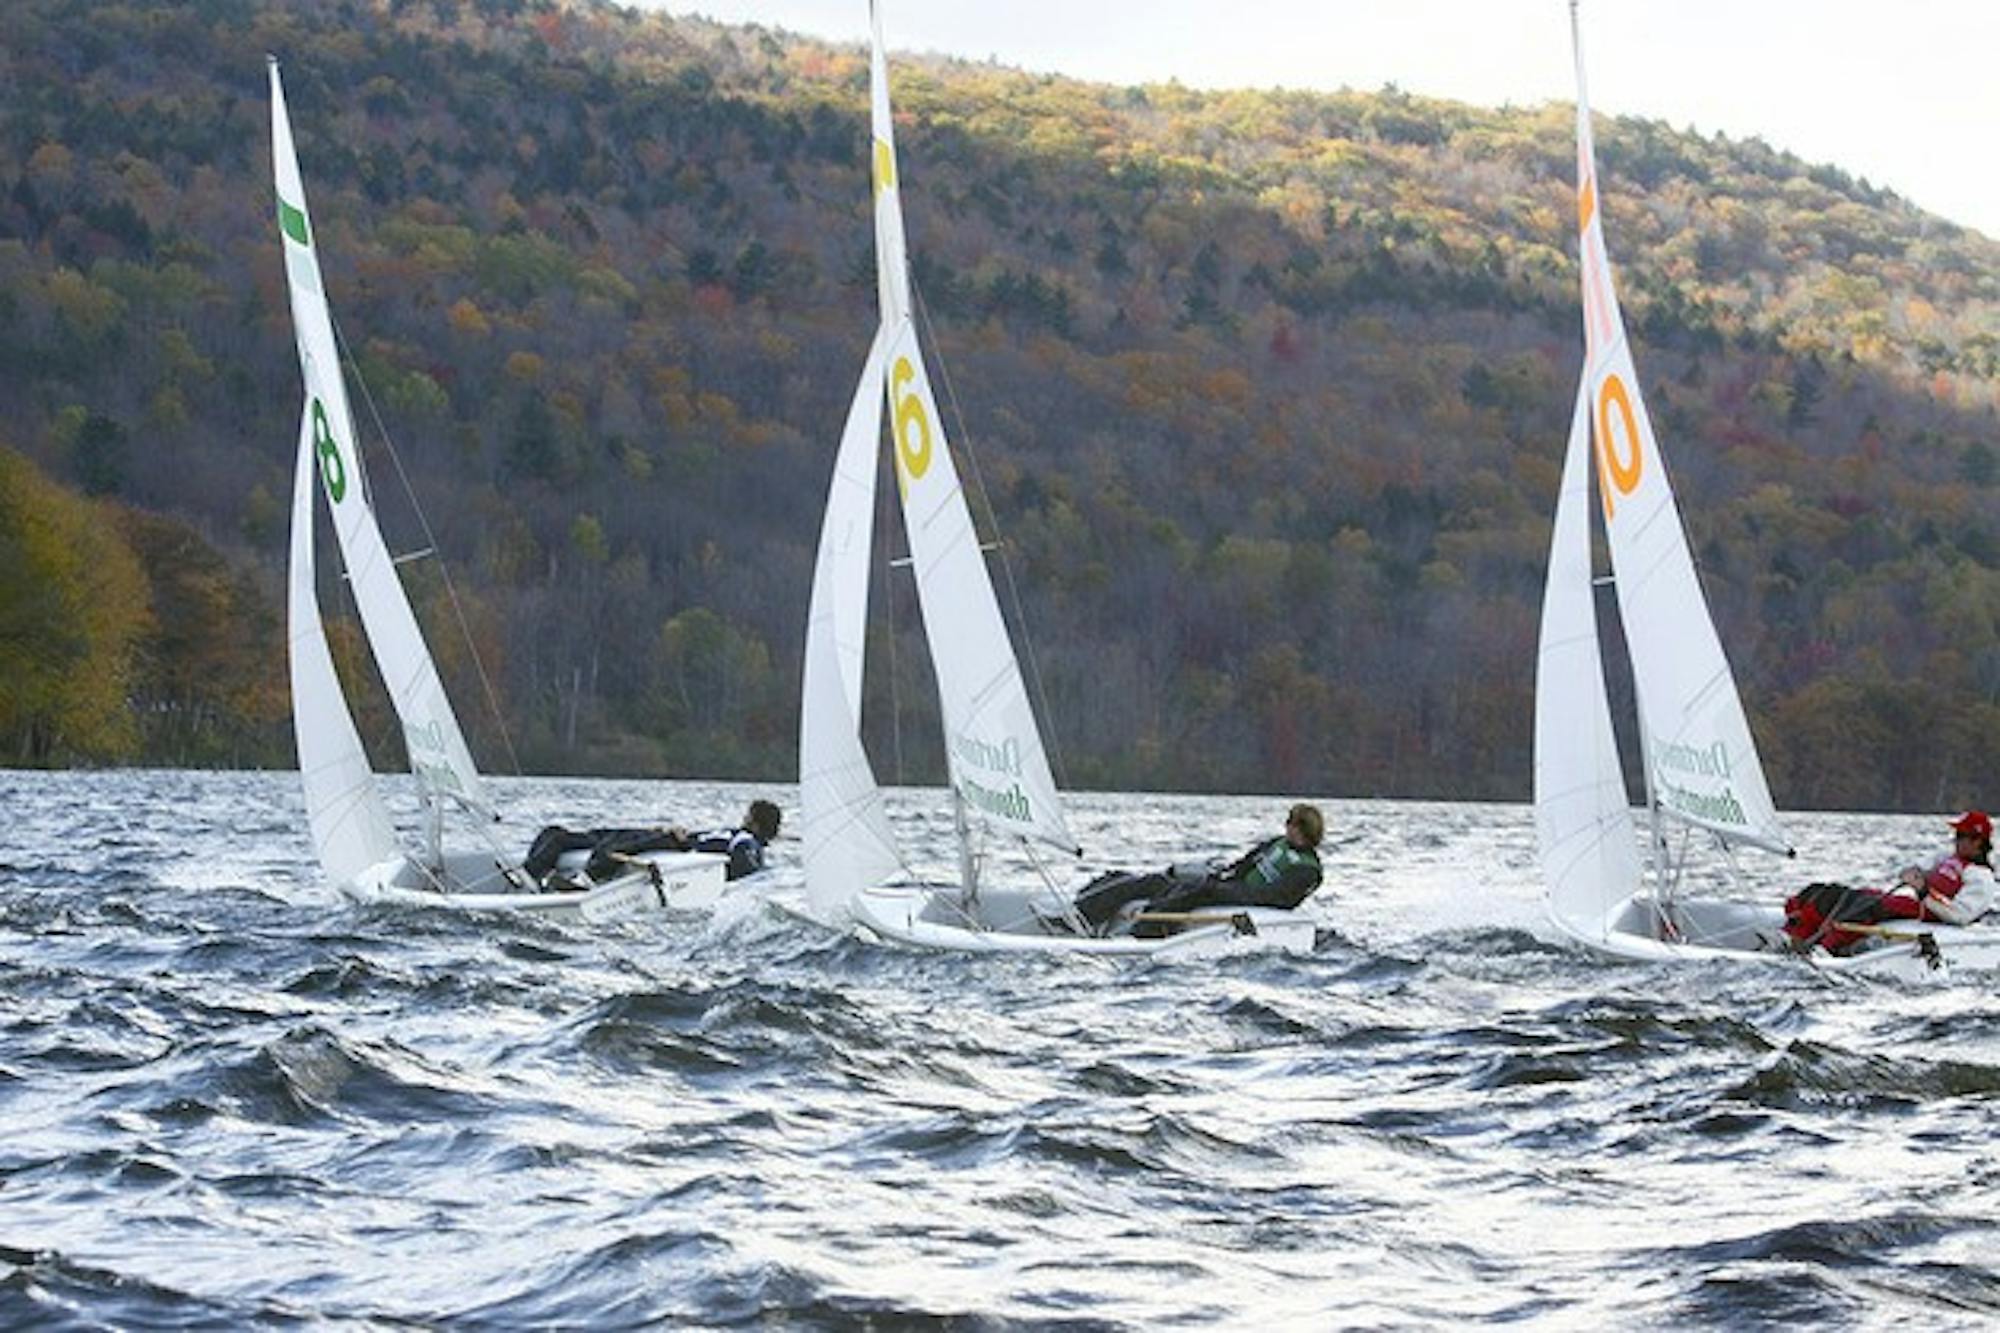 The Dartmouth sailing team qualified for the ICSA Coed National Championship over the weekend.